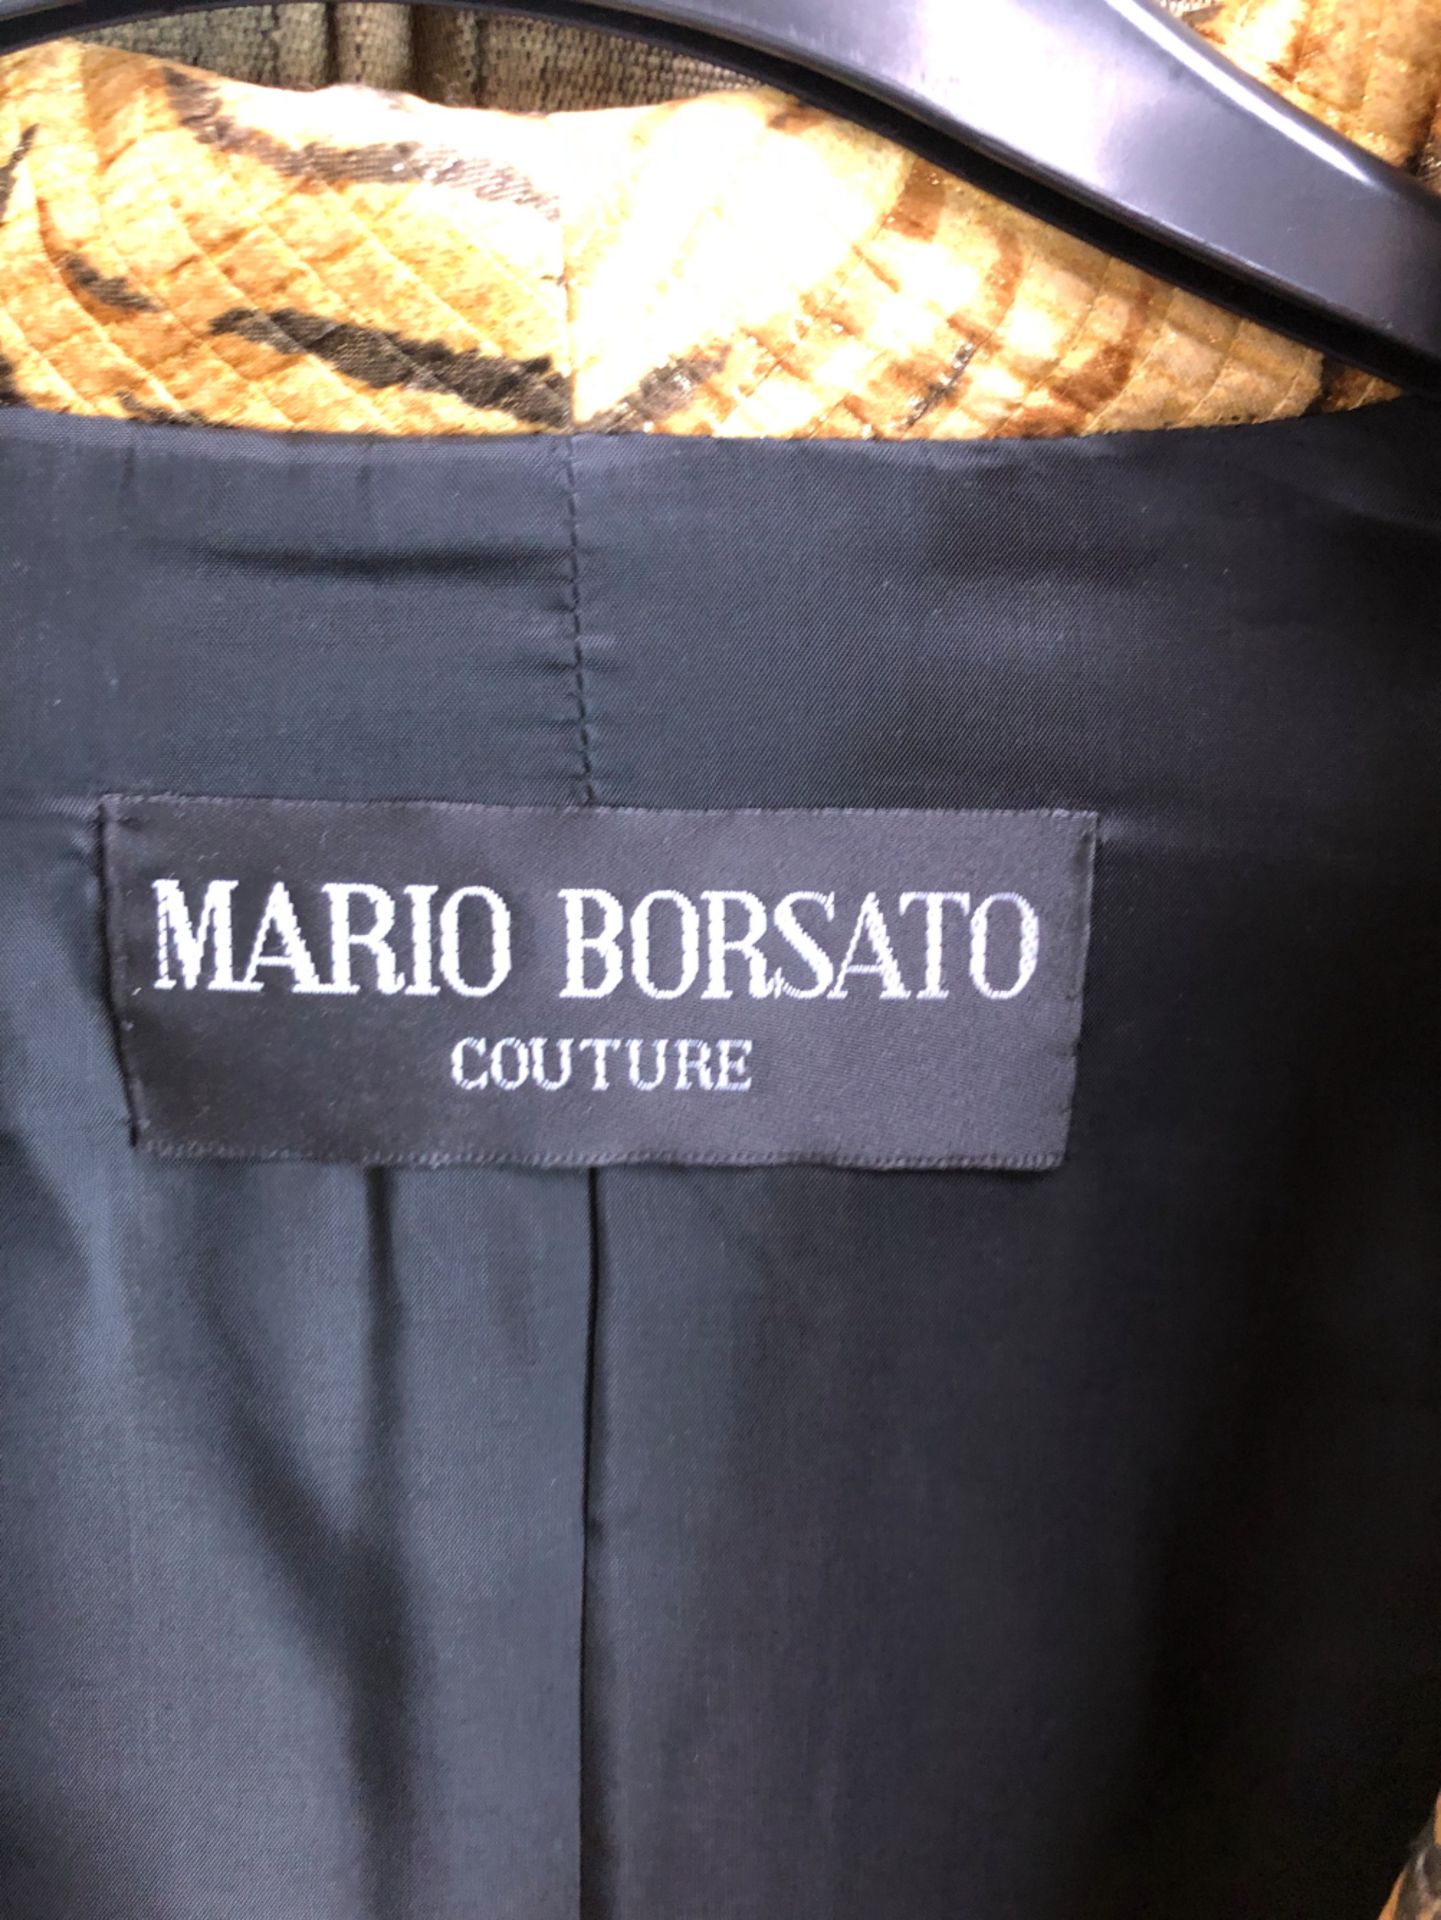 A PAIR OF WIDE LEGGED BLACK TROUSERS BY MARIO BORSATO COUTURE SIZE 44 AND A BLACK MARIO BORSATO - Image 21 of 25